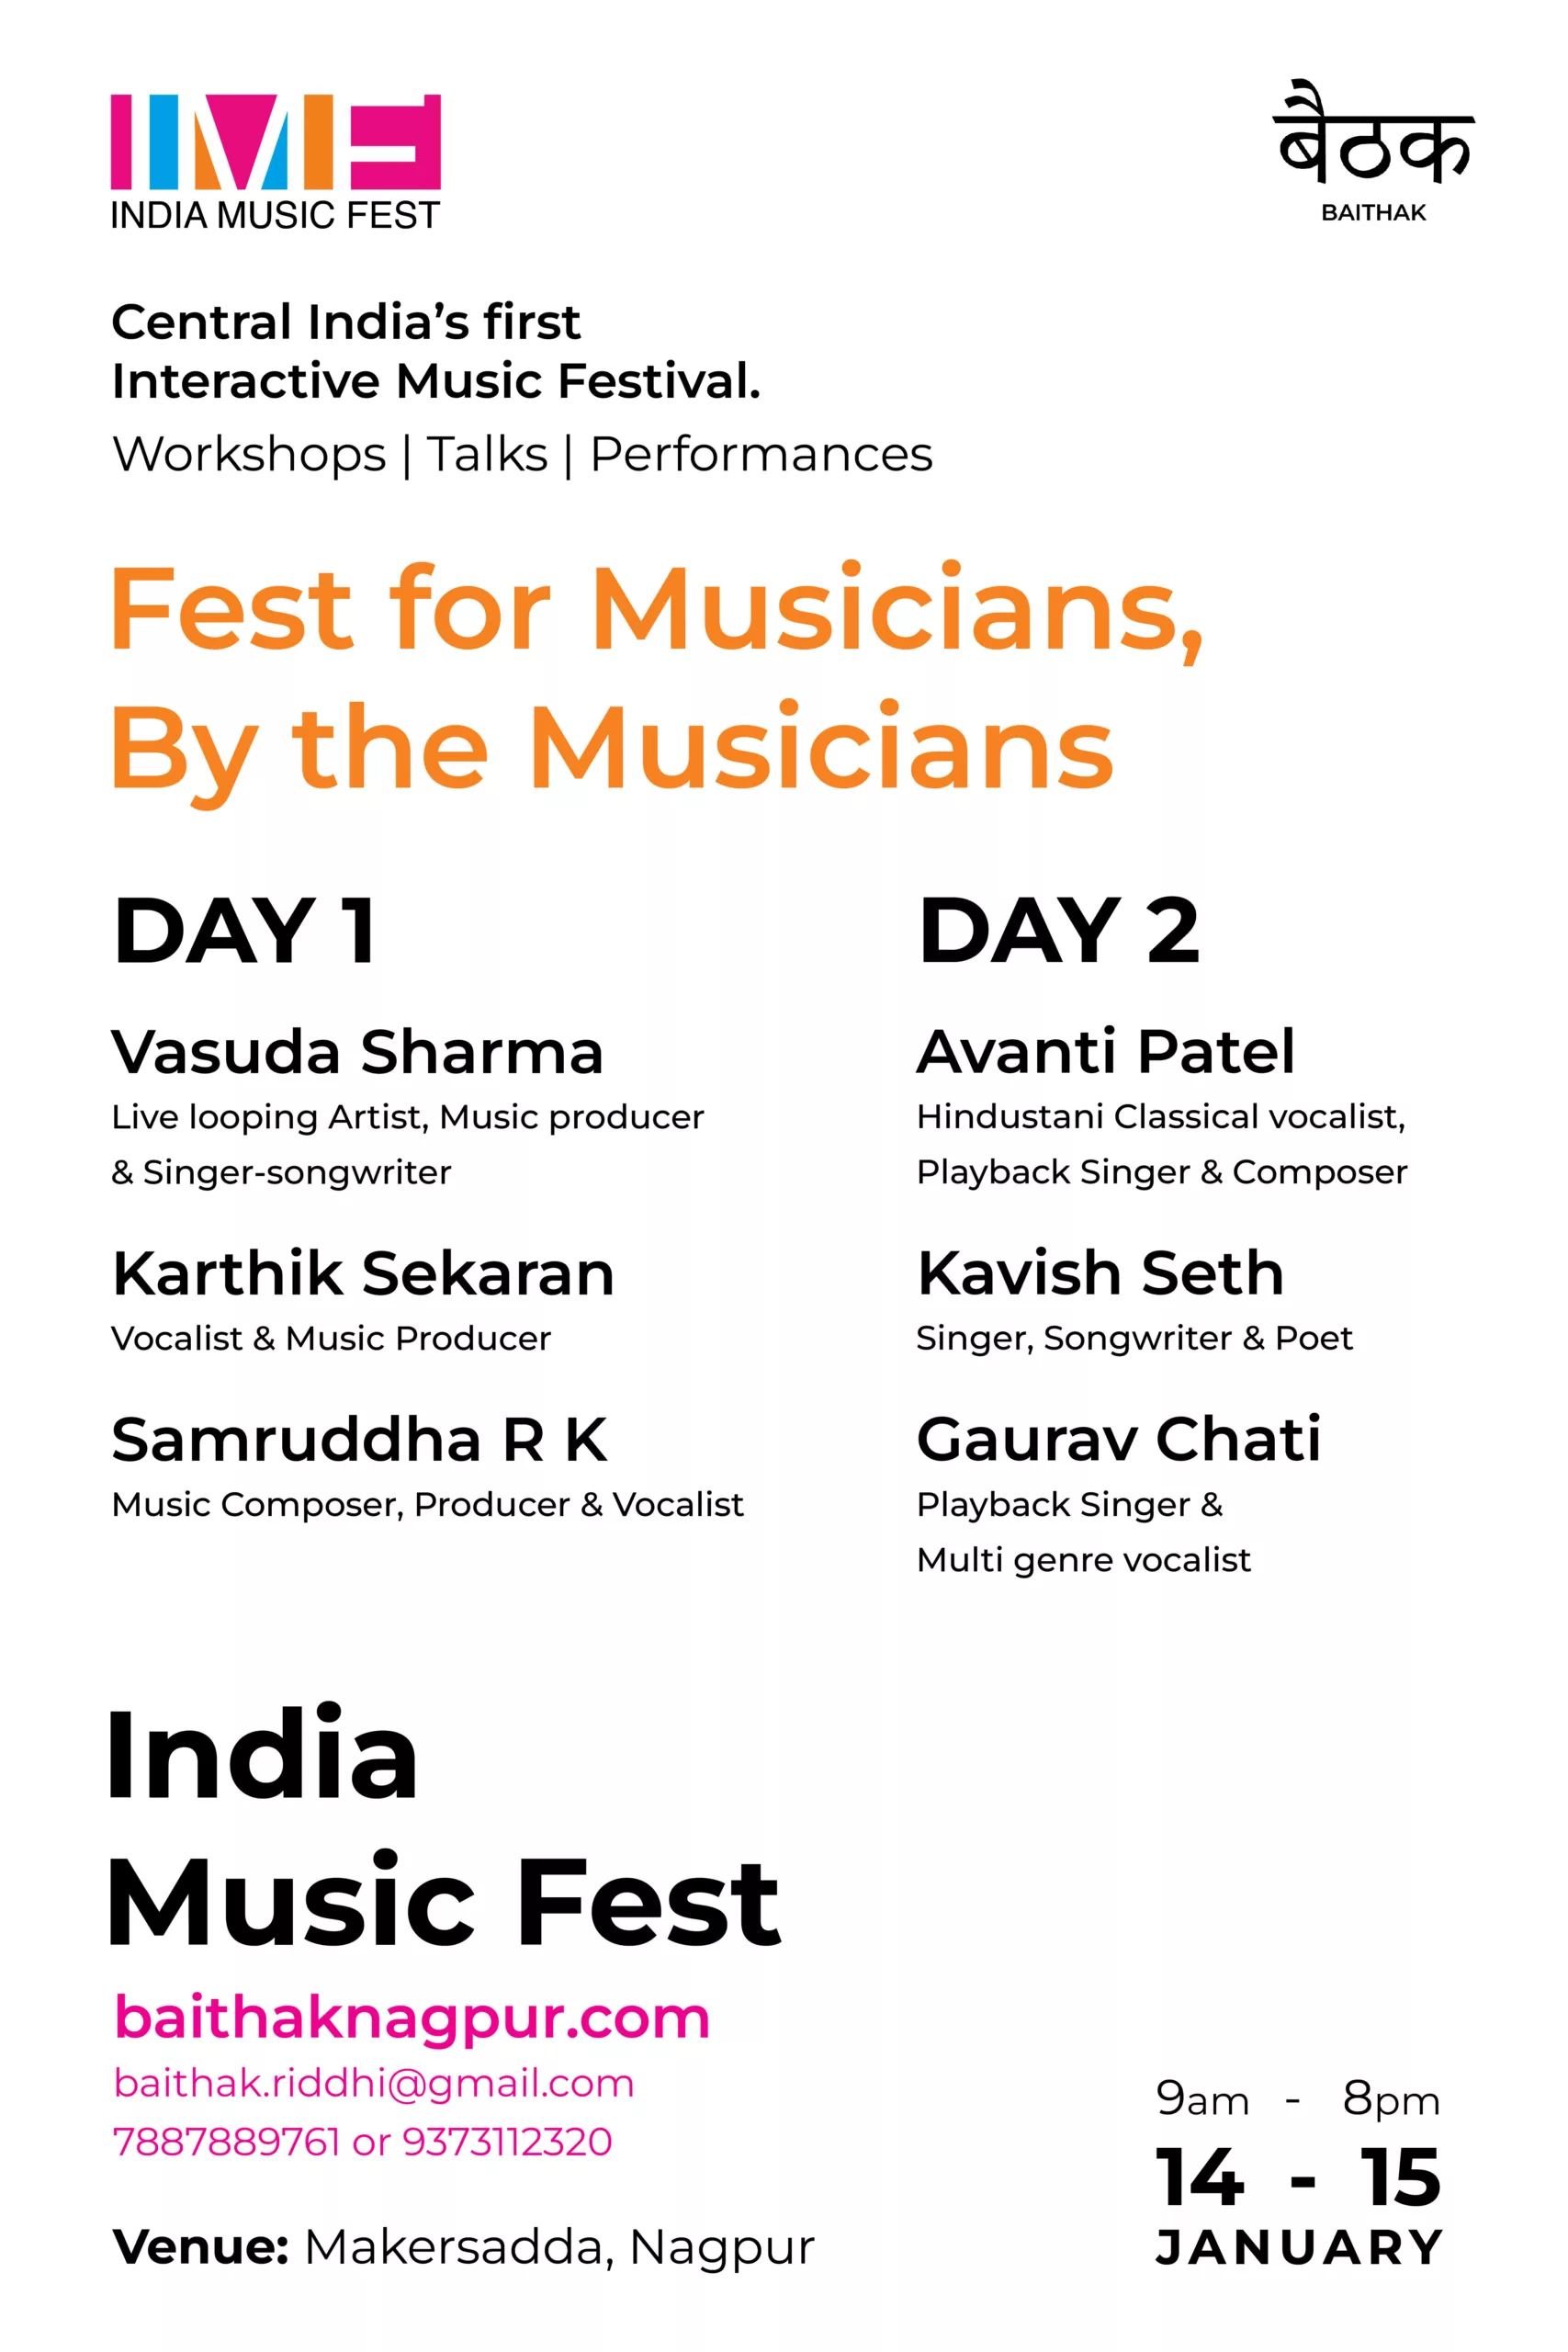 A good way to start your year with loads of music and fun, India Music Fest can be a good starting point.